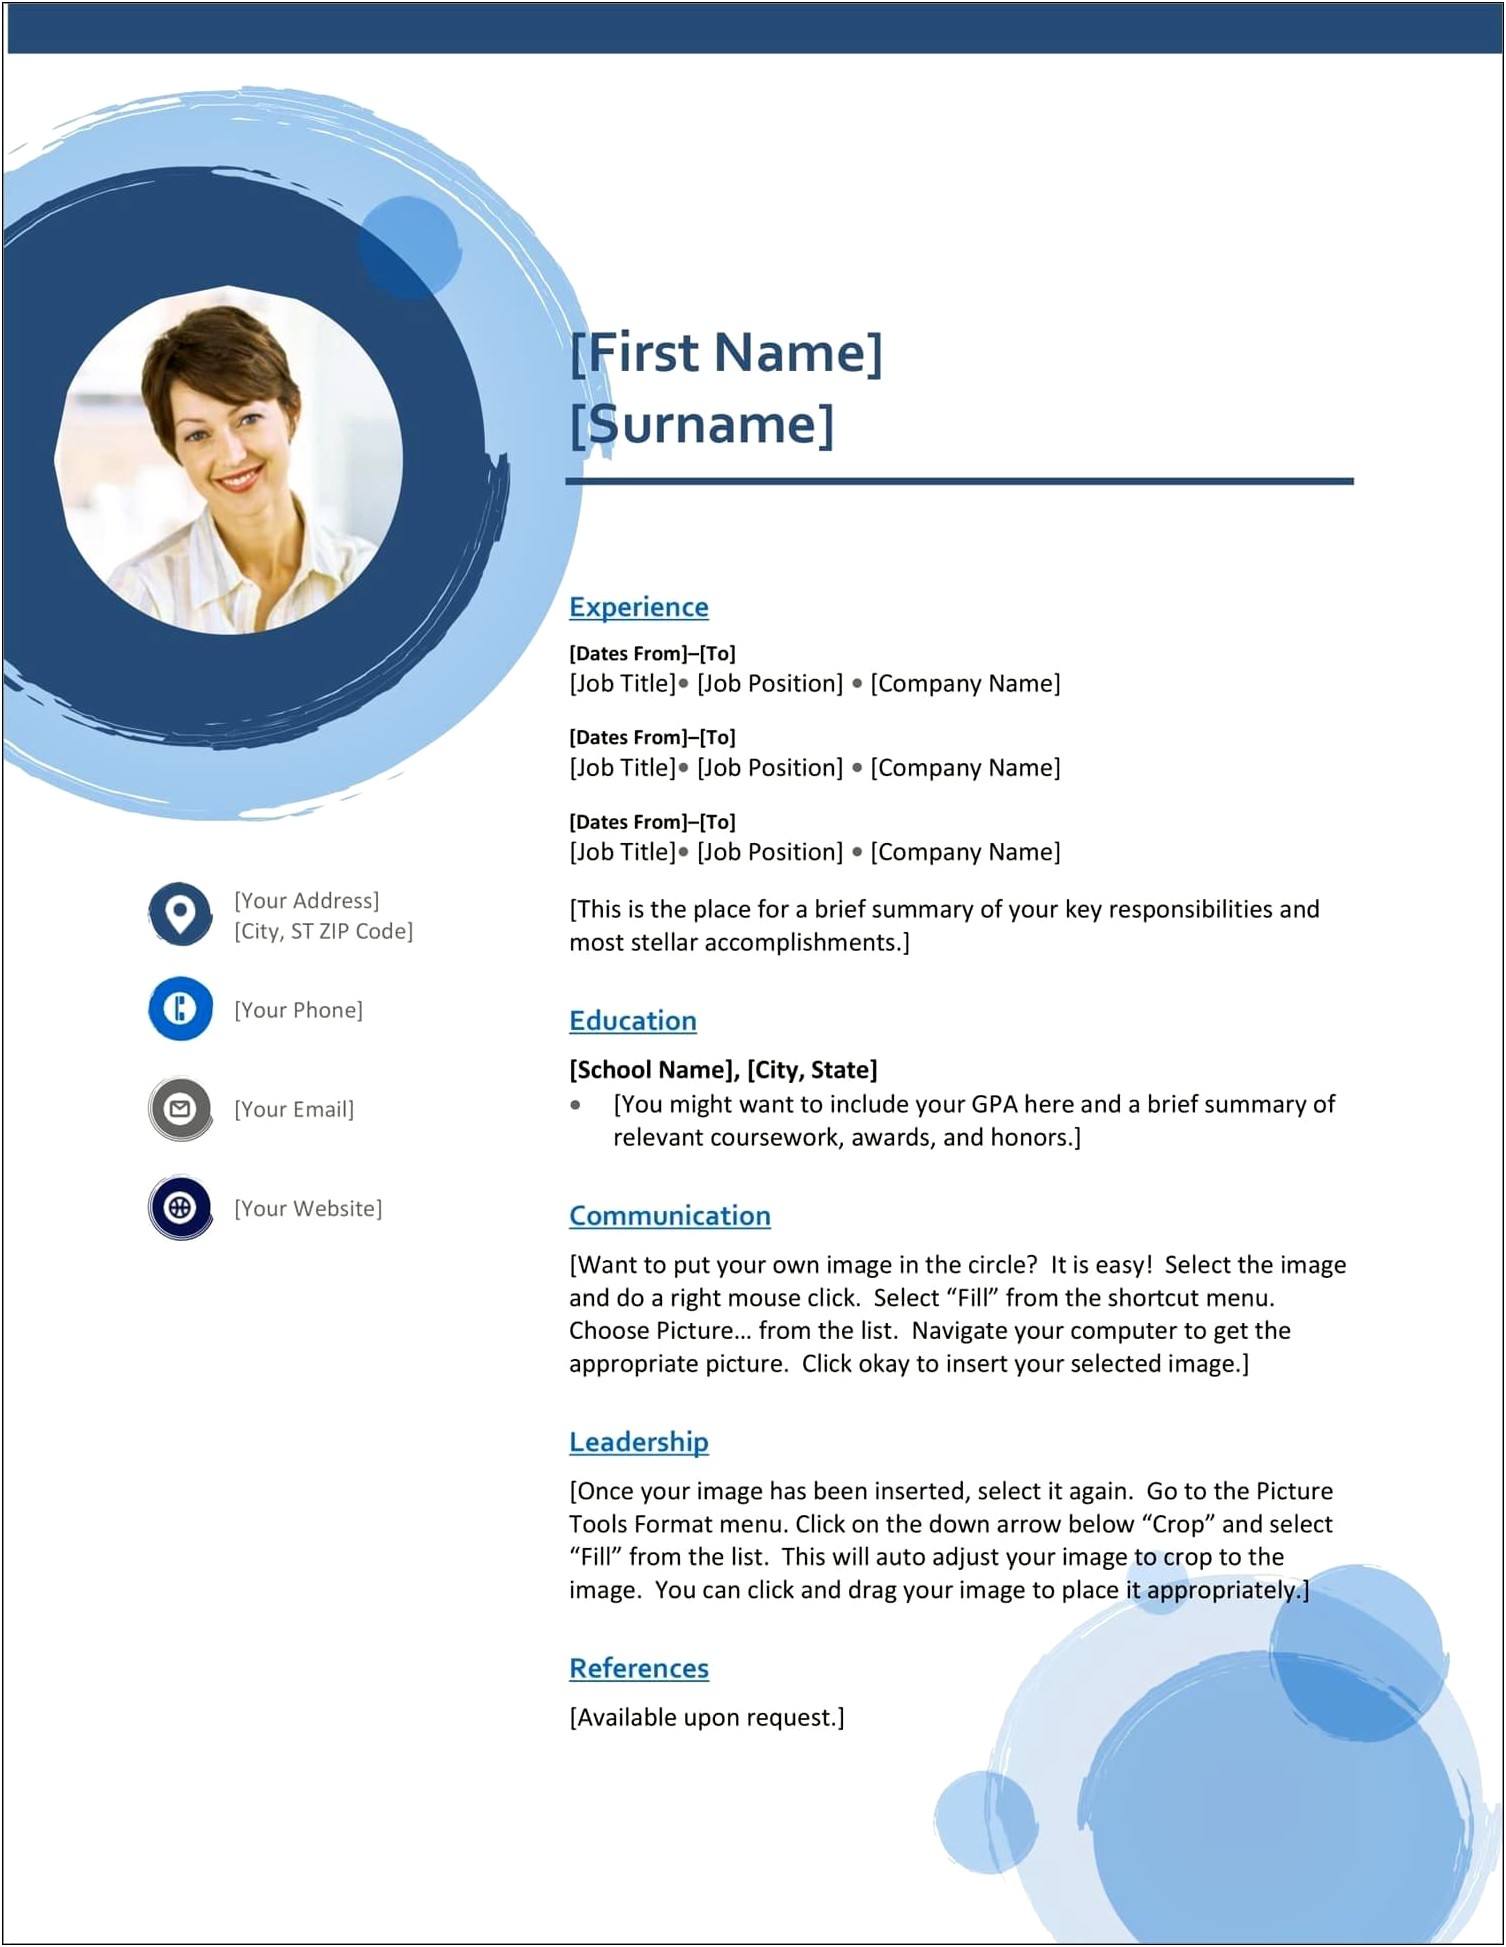 Best Professional Resume Format Free Download